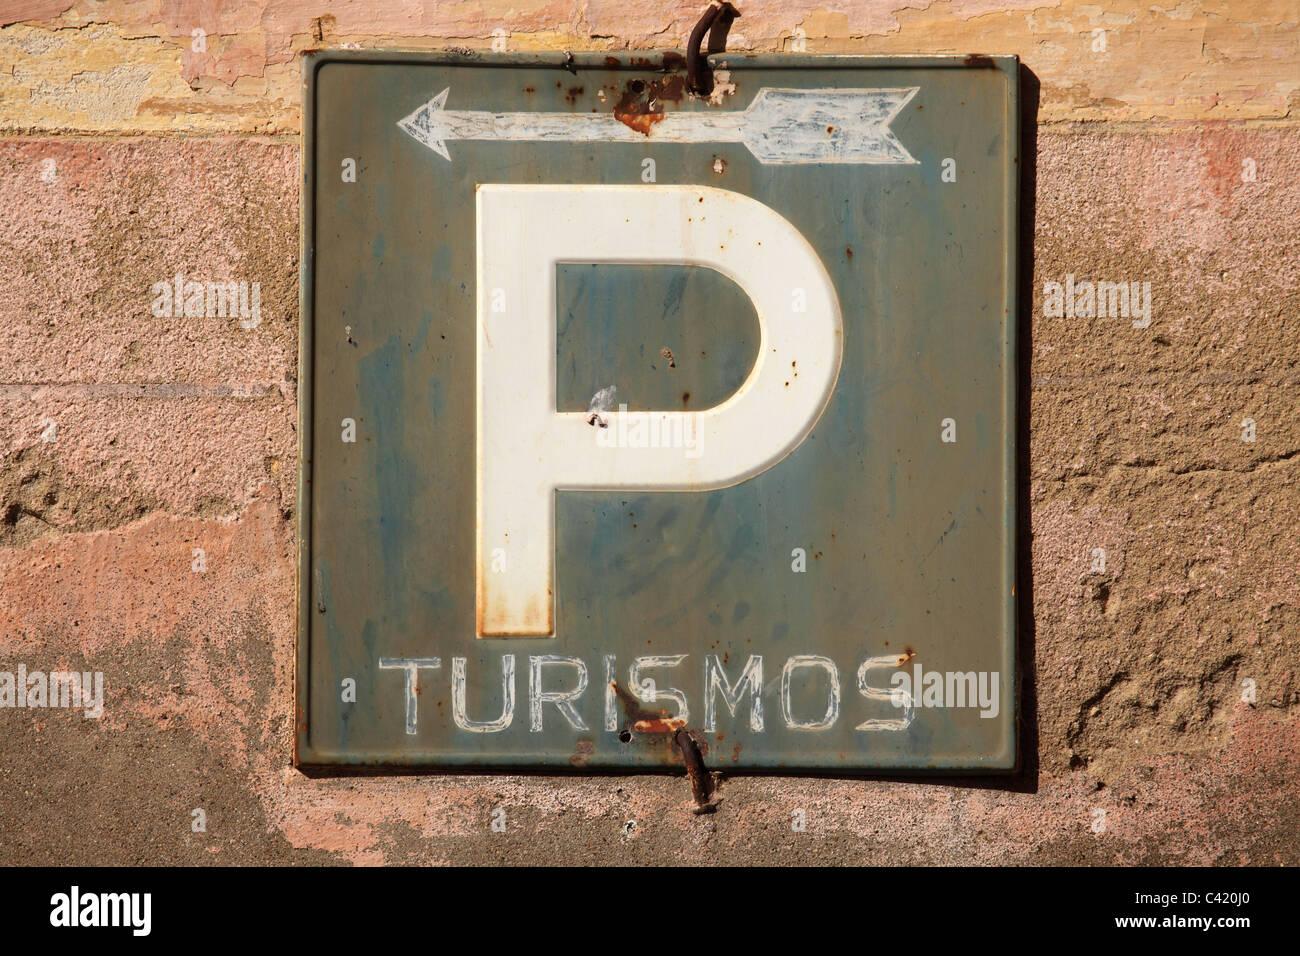 A 'P' denotes parking for tourists (Turismos) on a street in Alcantara in Spain. Stock Photo